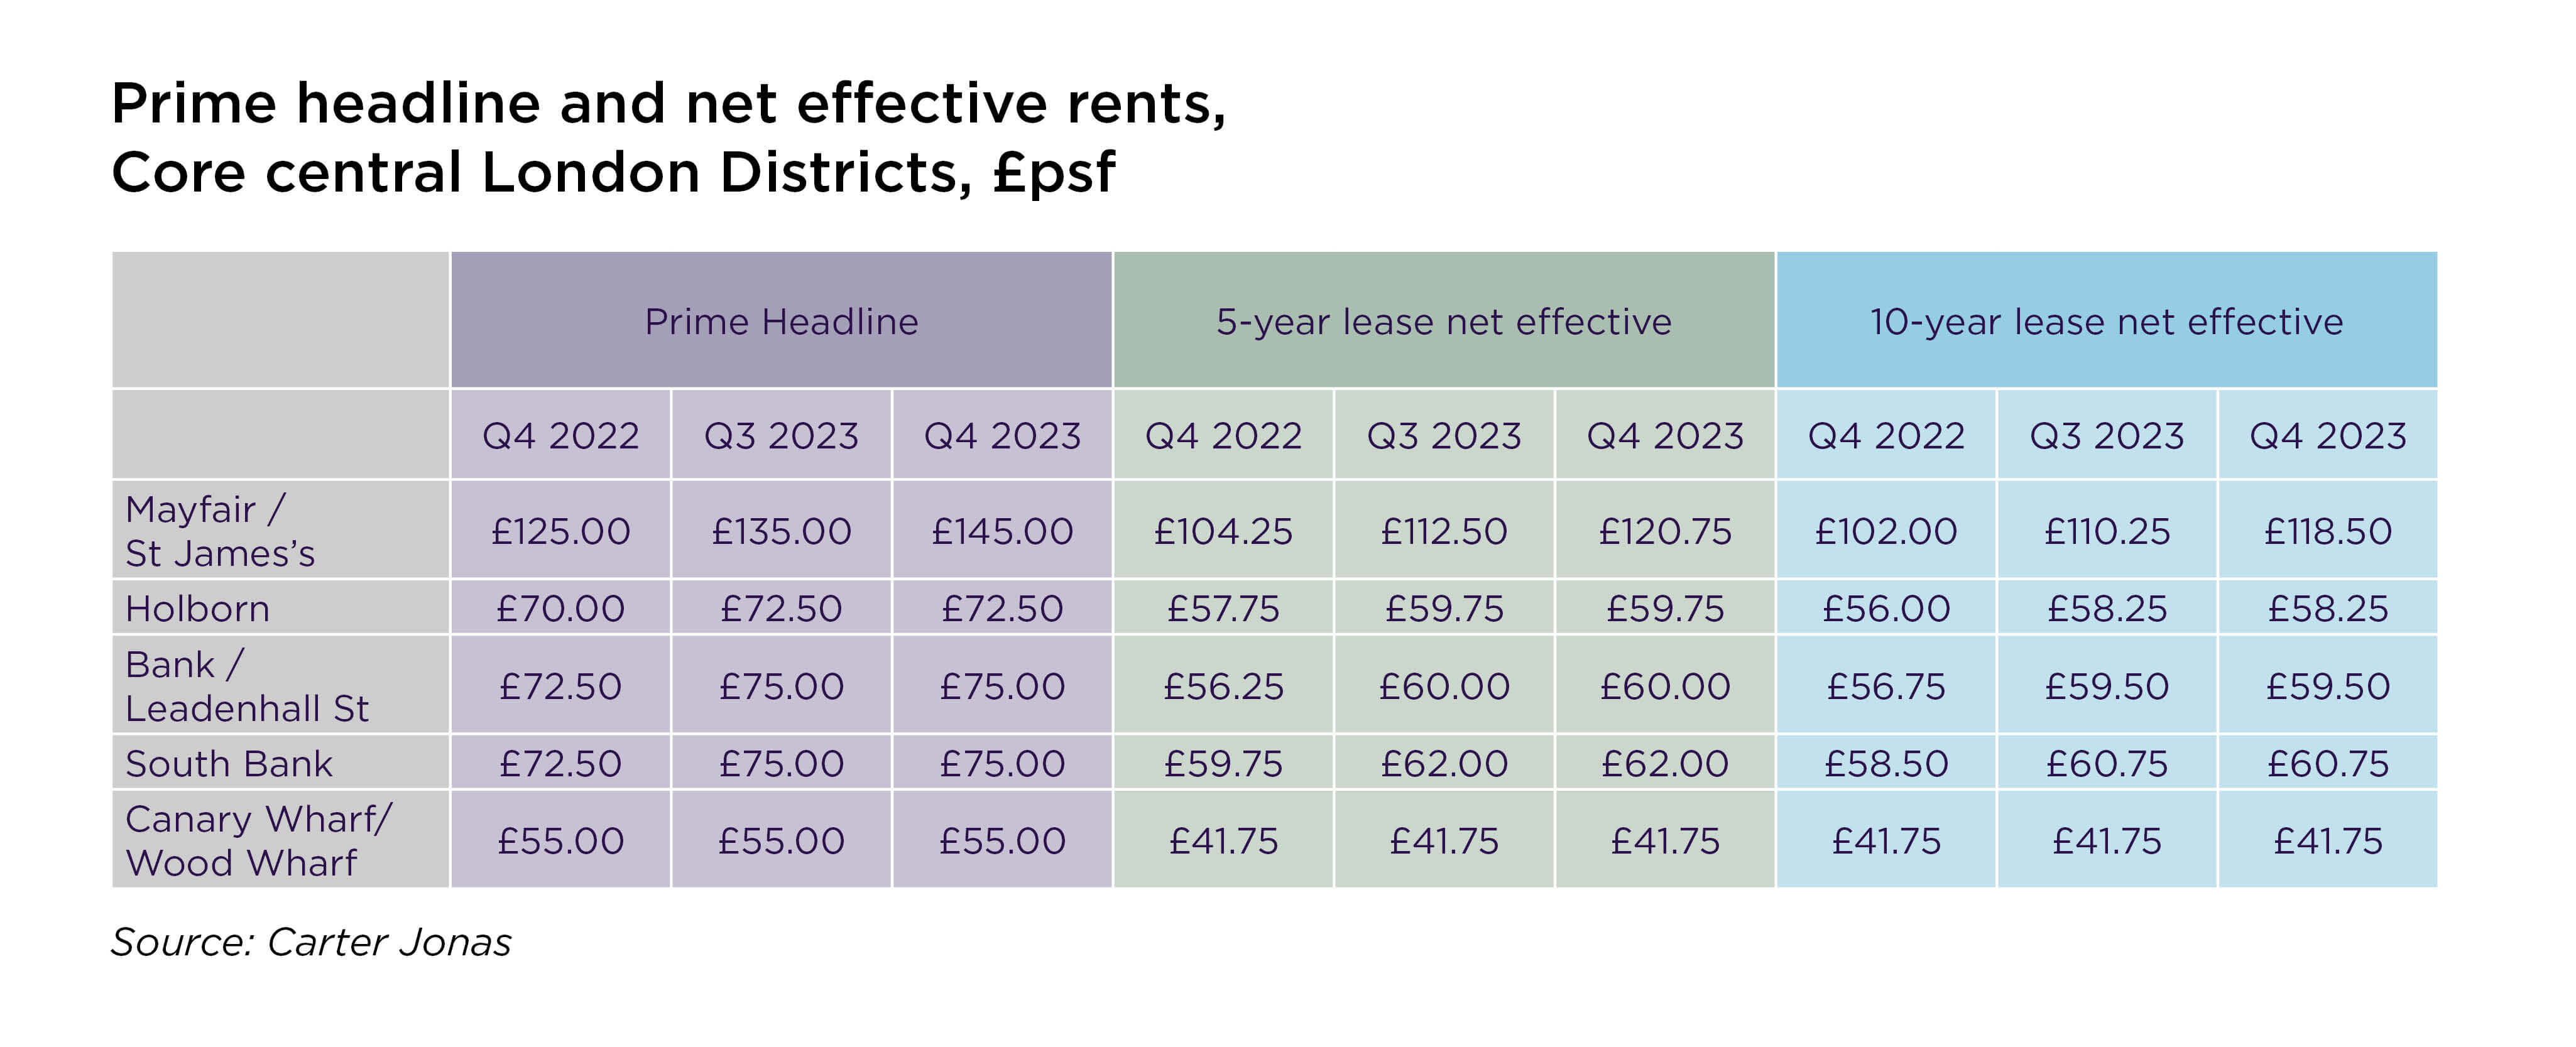 Prime headline and net effective rents, Core central London Districts (£ per sq ft per annum)